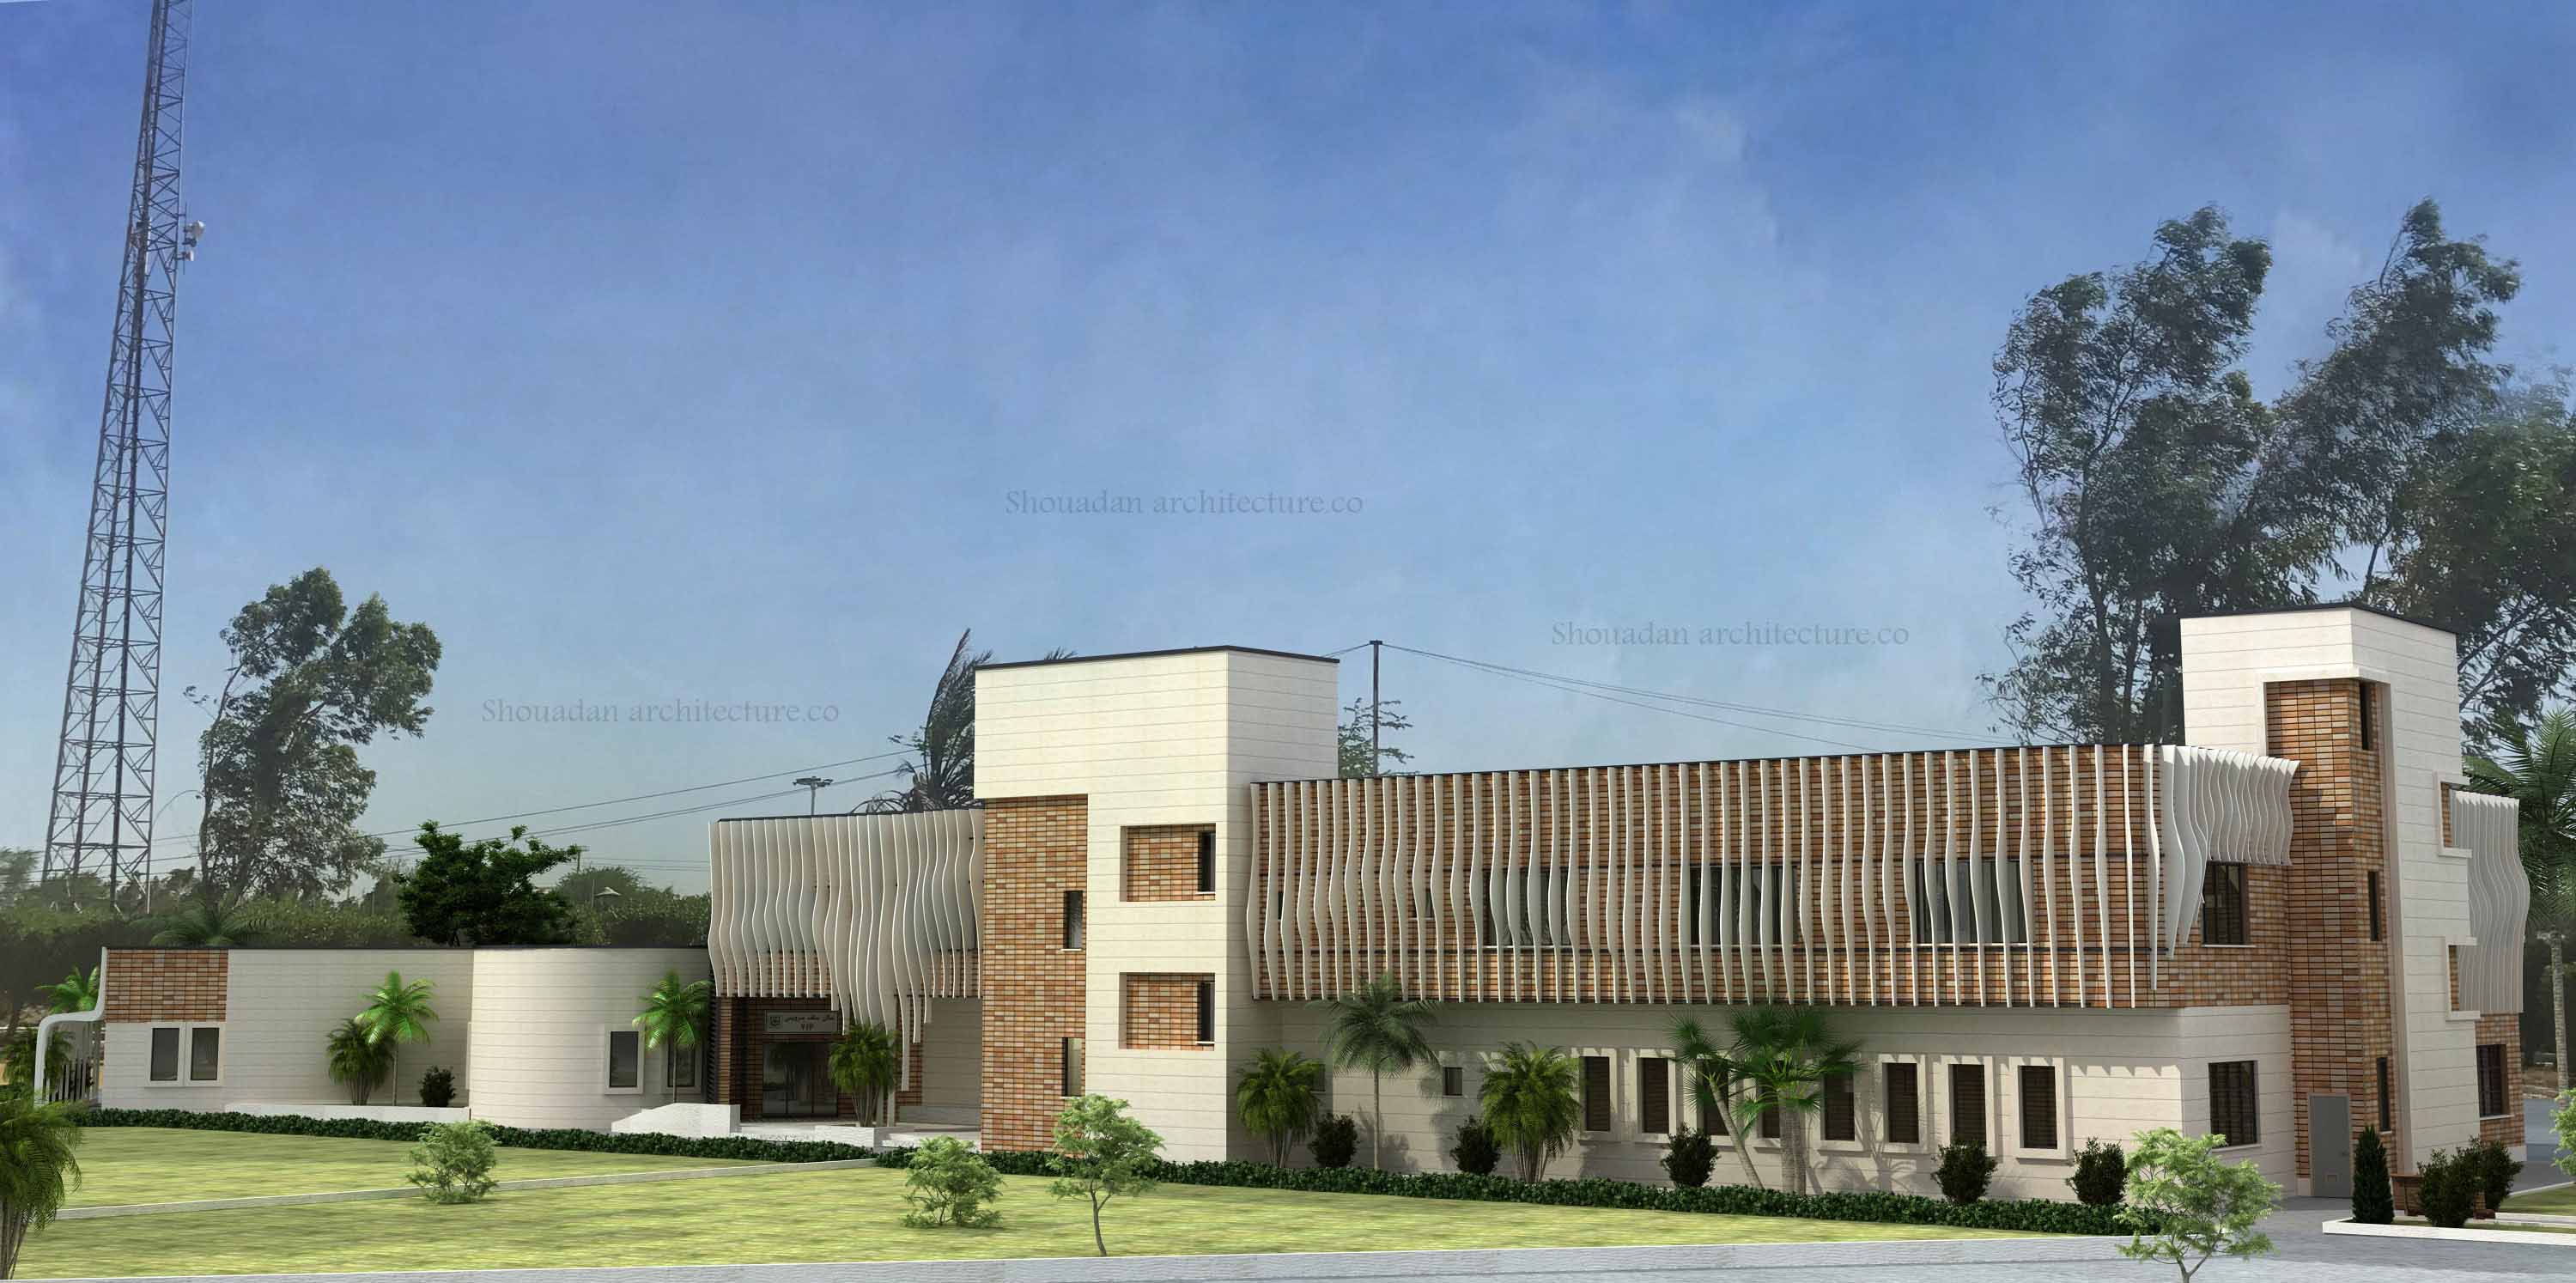 Self-Service Building for Abadan Students Department of Education